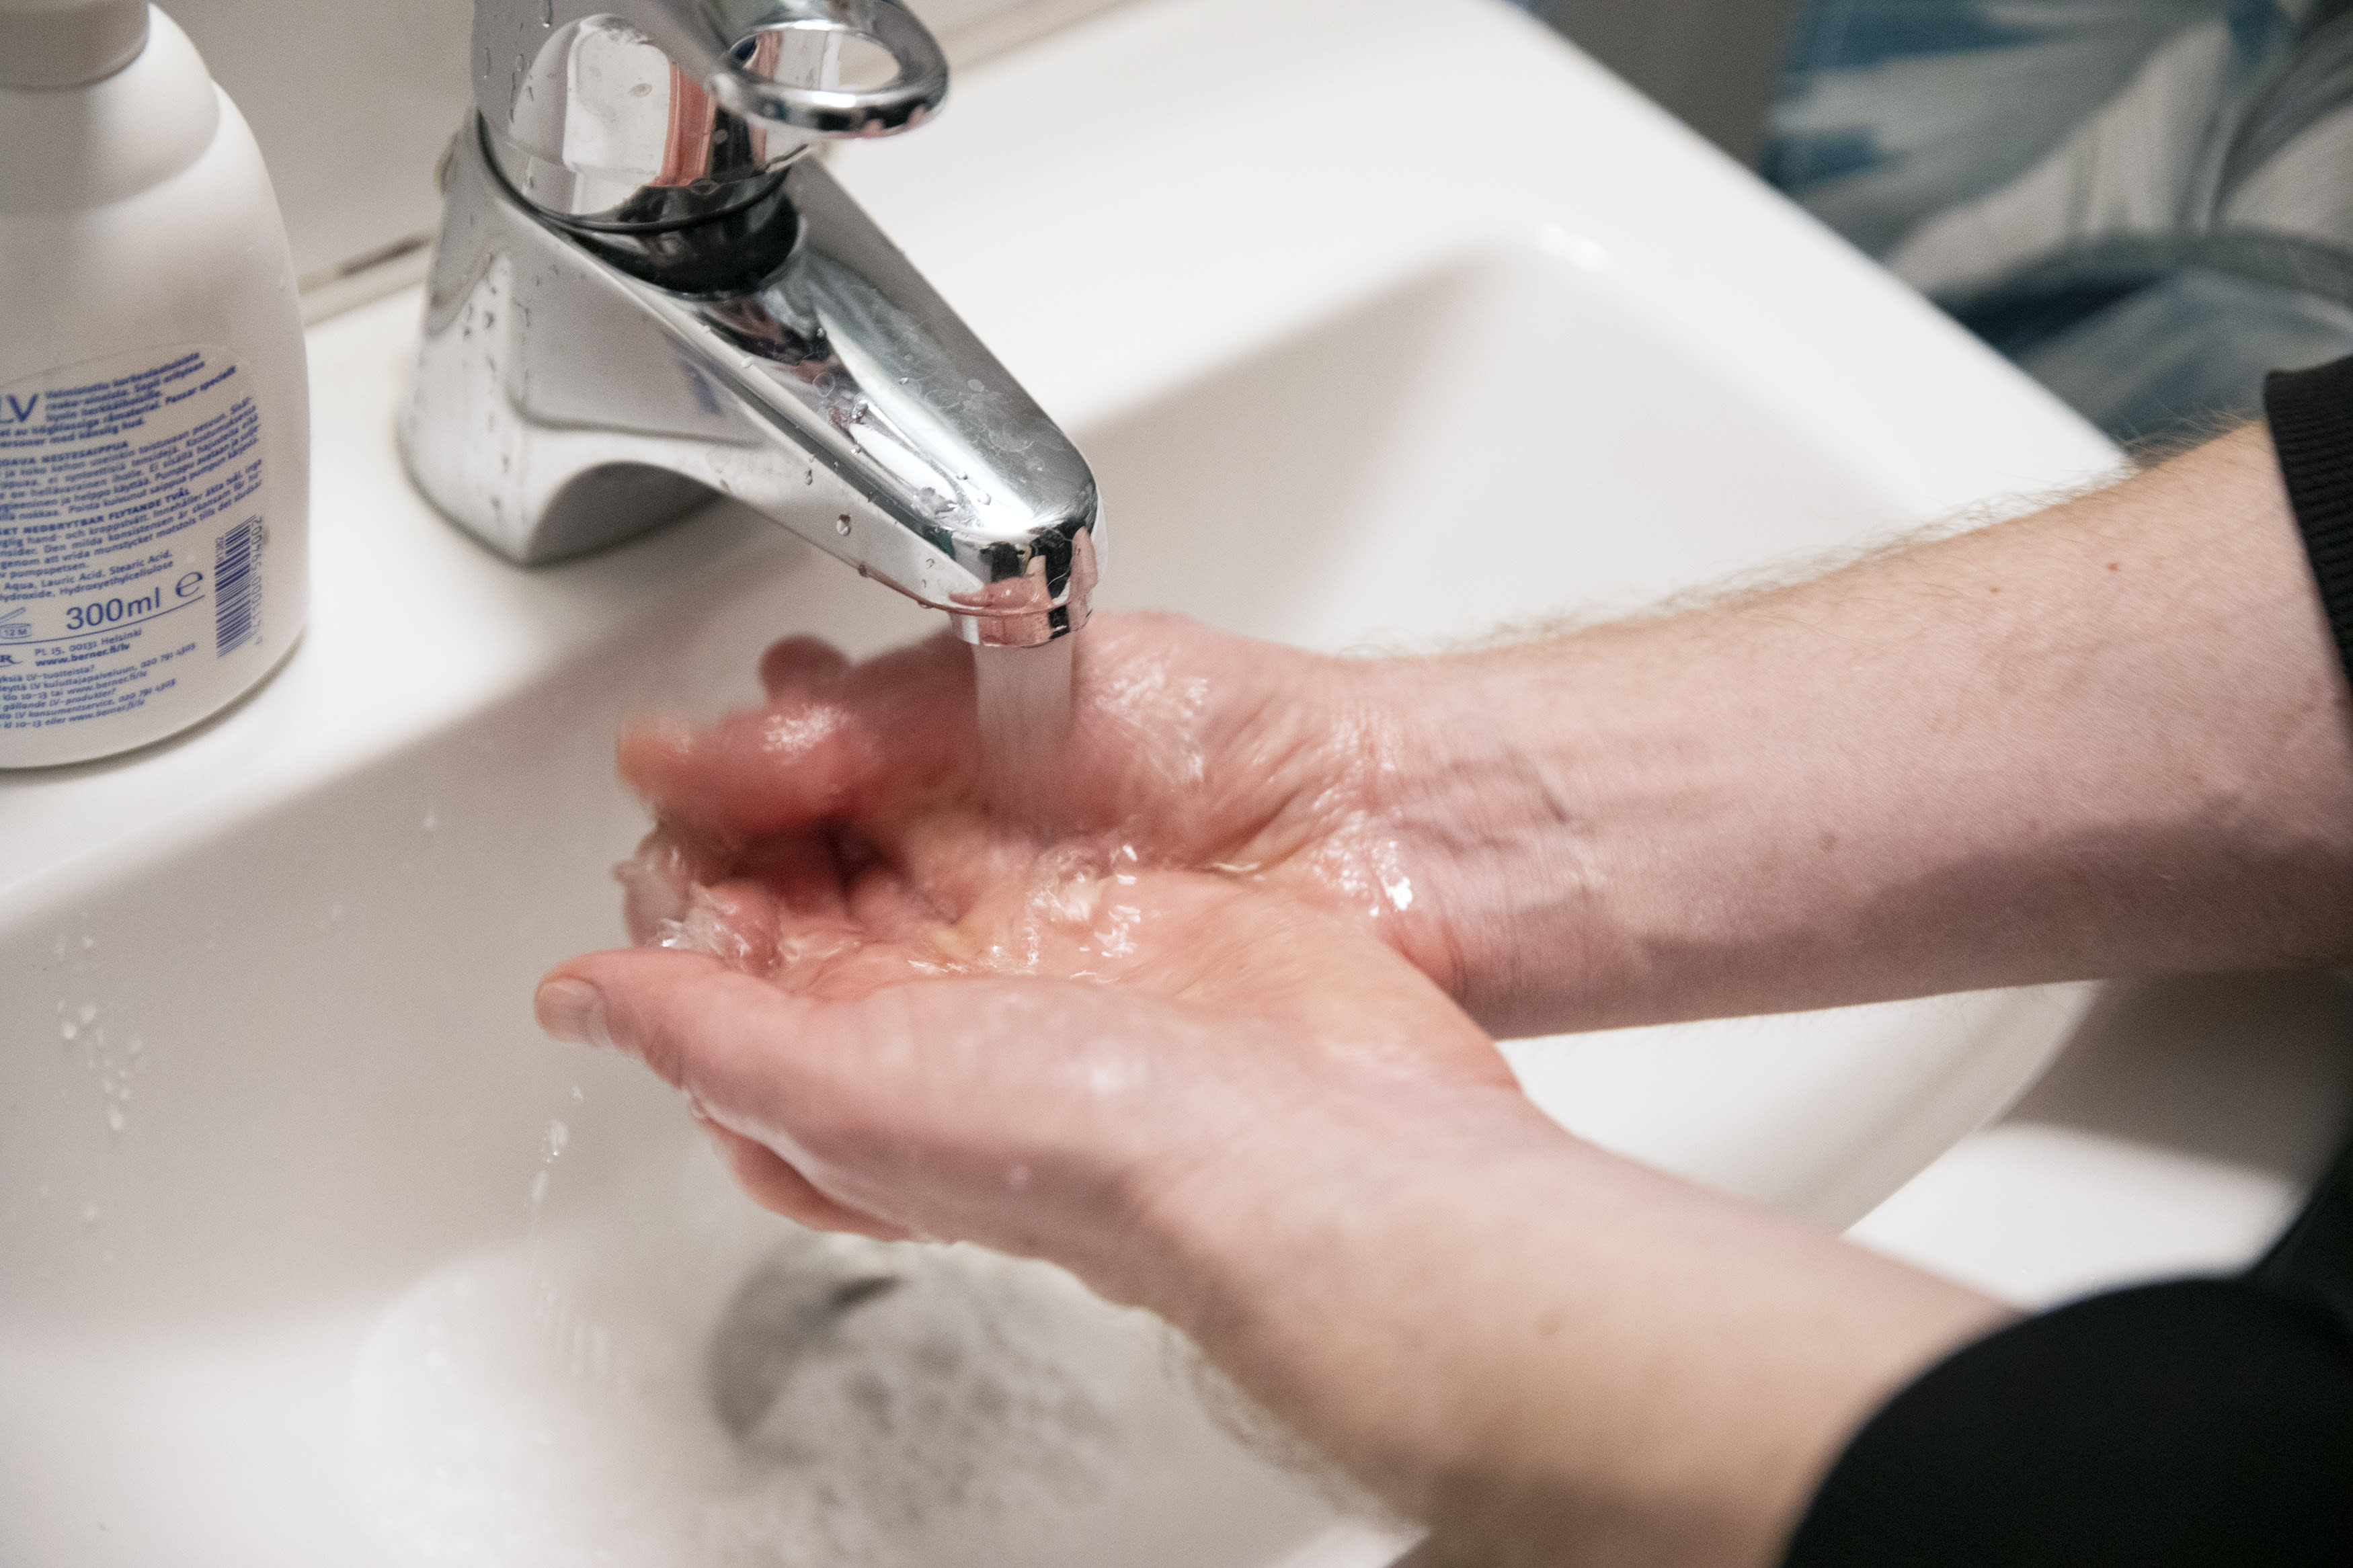 THL's expert advises washing hands for 40 seconds amid the spread of the norovirus